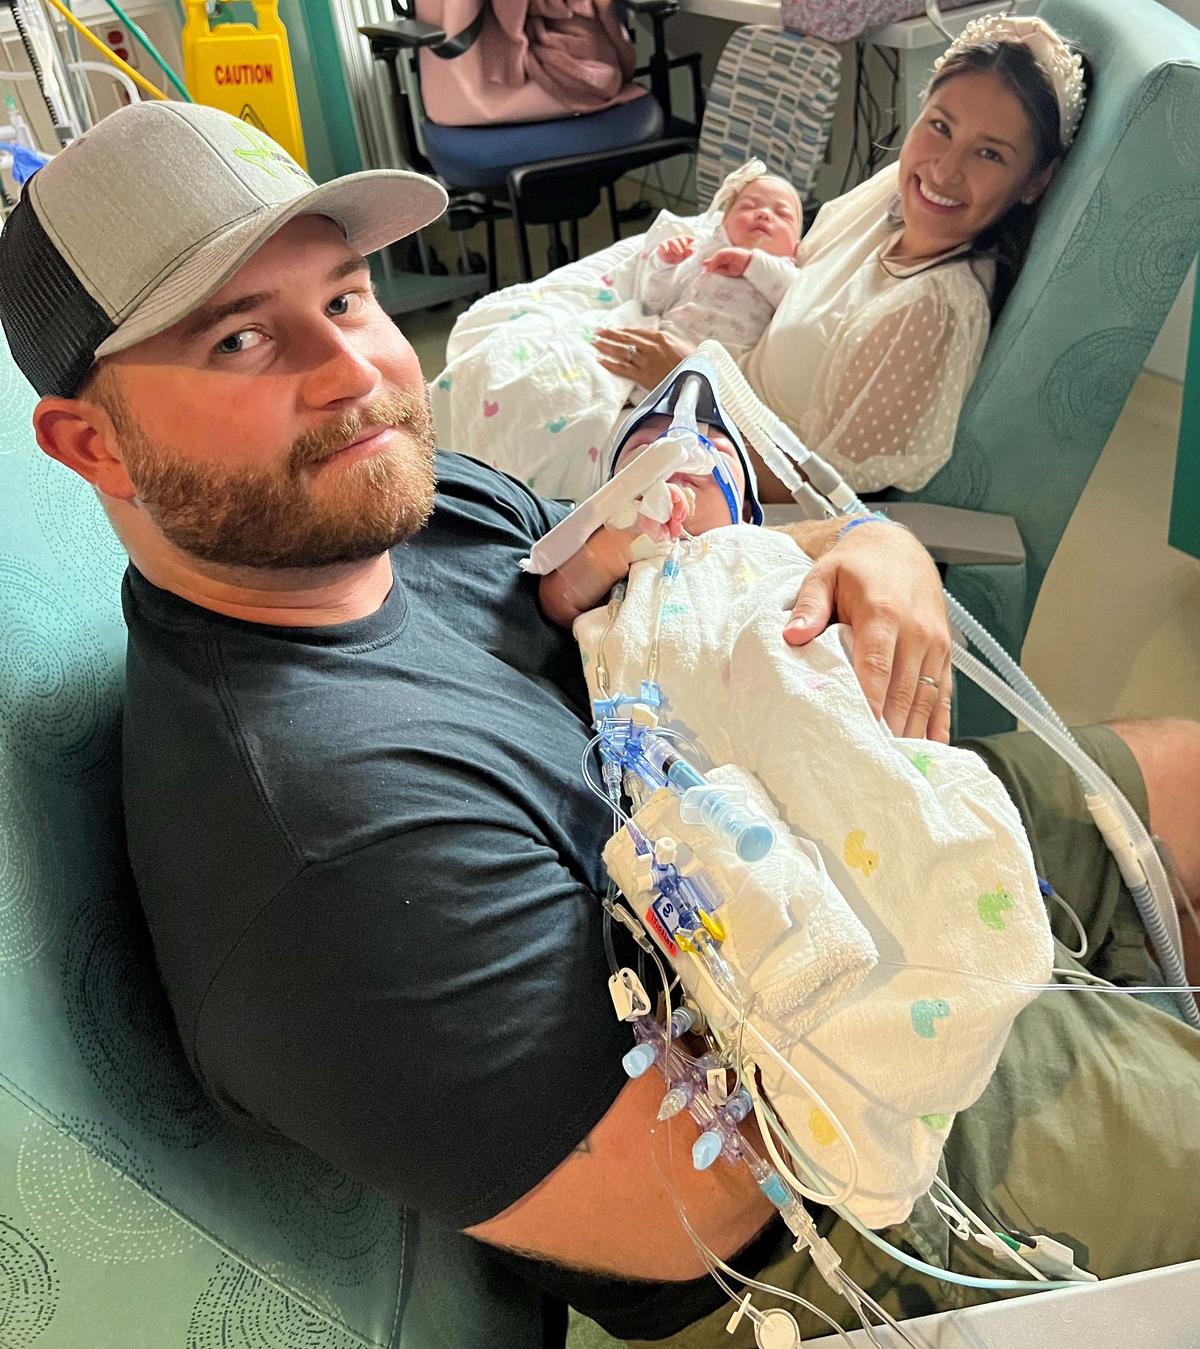 Mr. and Ms. Fuller holding both their babies. (Courtesy of Texas Children’s Hospital)